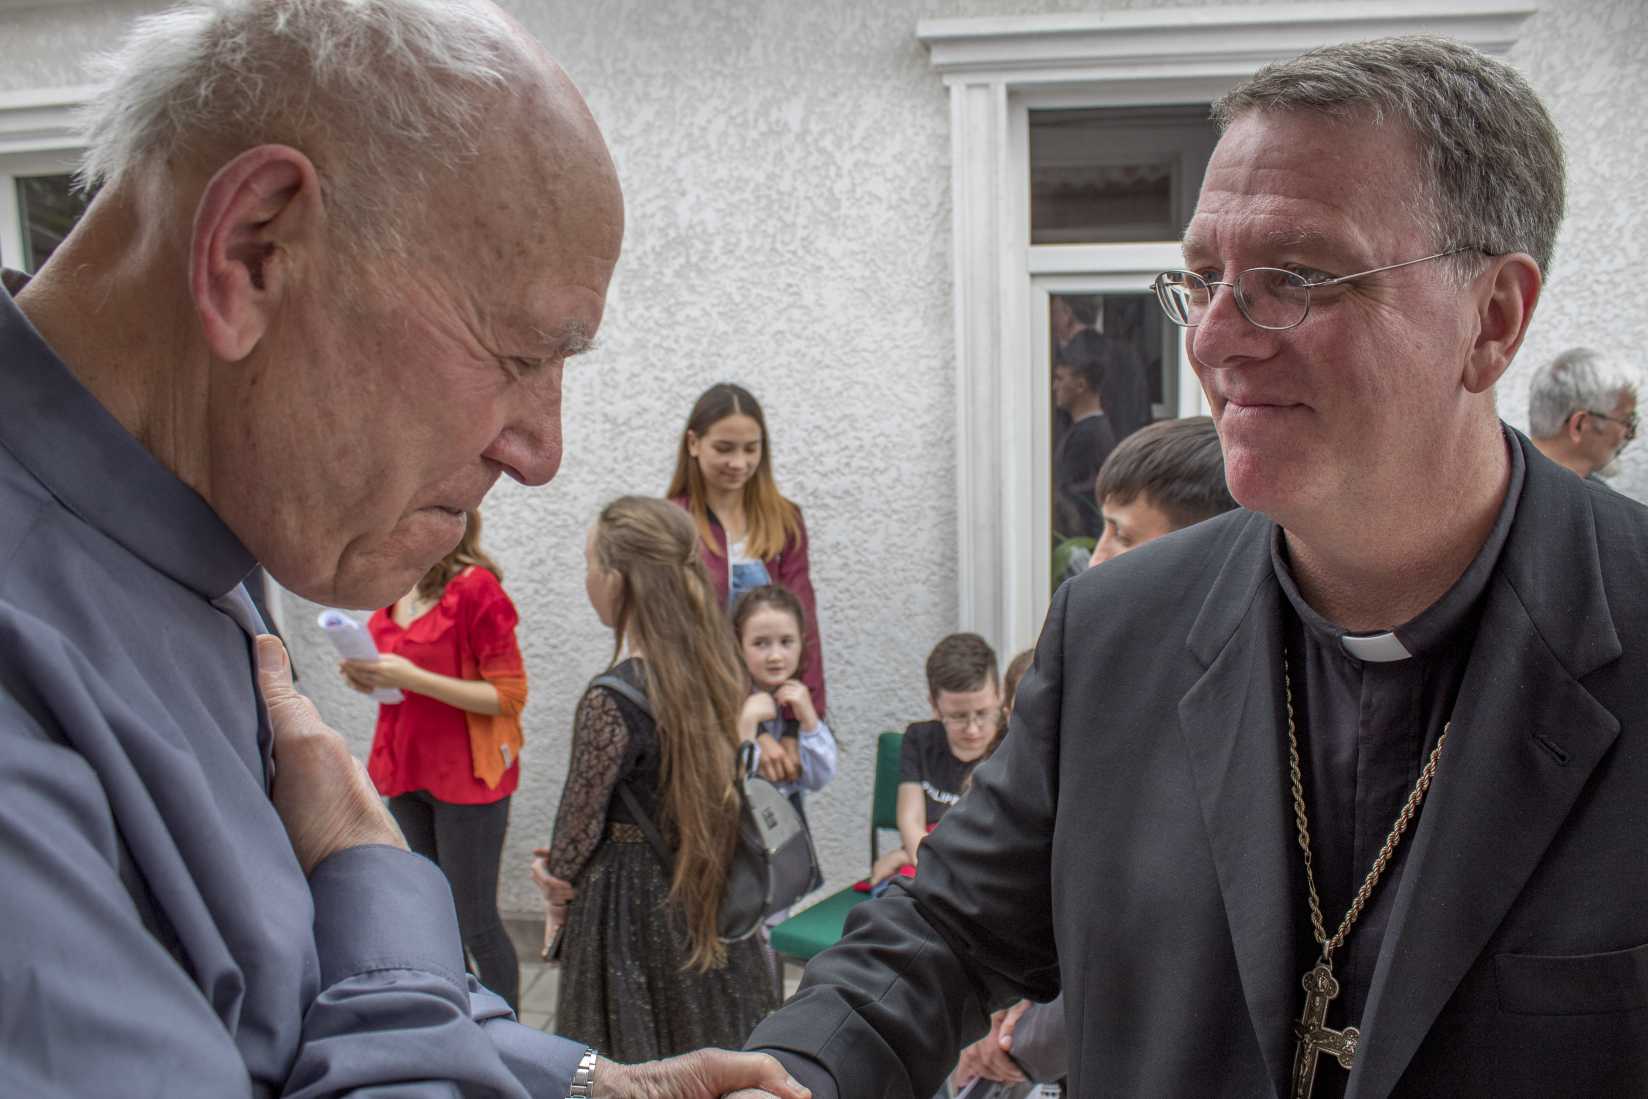 Q&A with Fr. Anthony Corcoran, an American priest serving Catholics in Kyrgyzstan